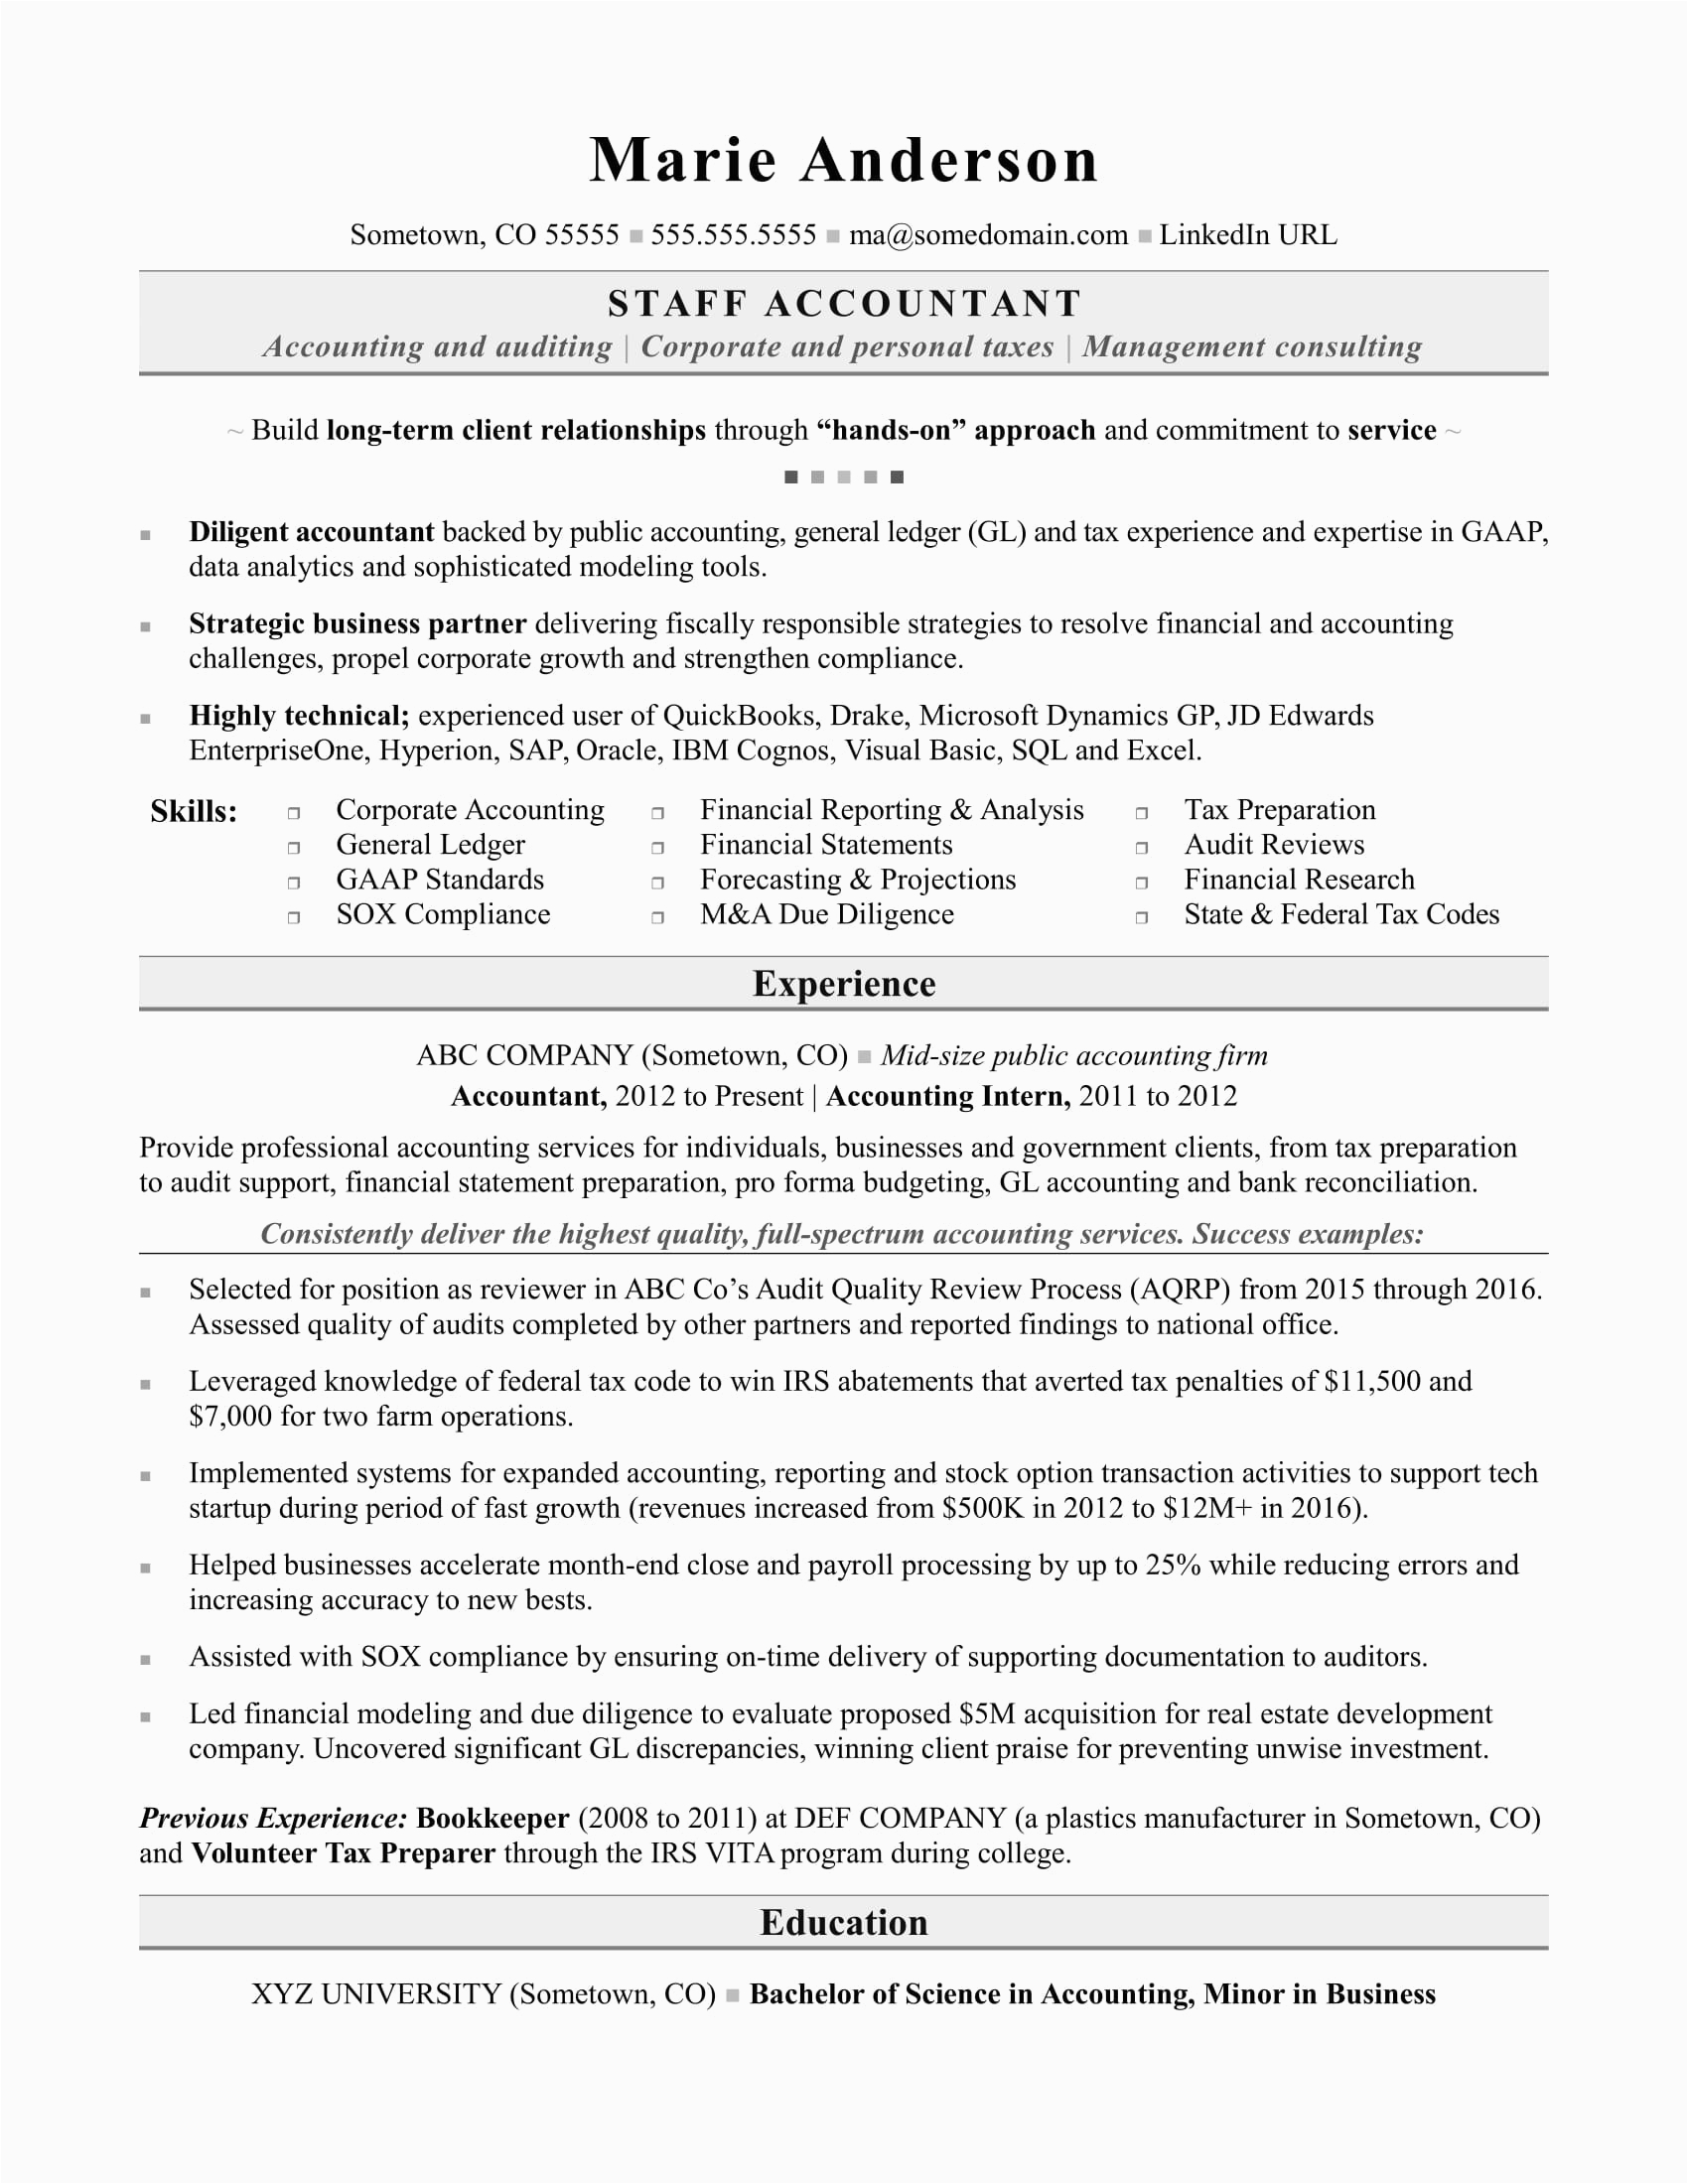 Resume Samples for Us Accounting Jobs Accountant Resume